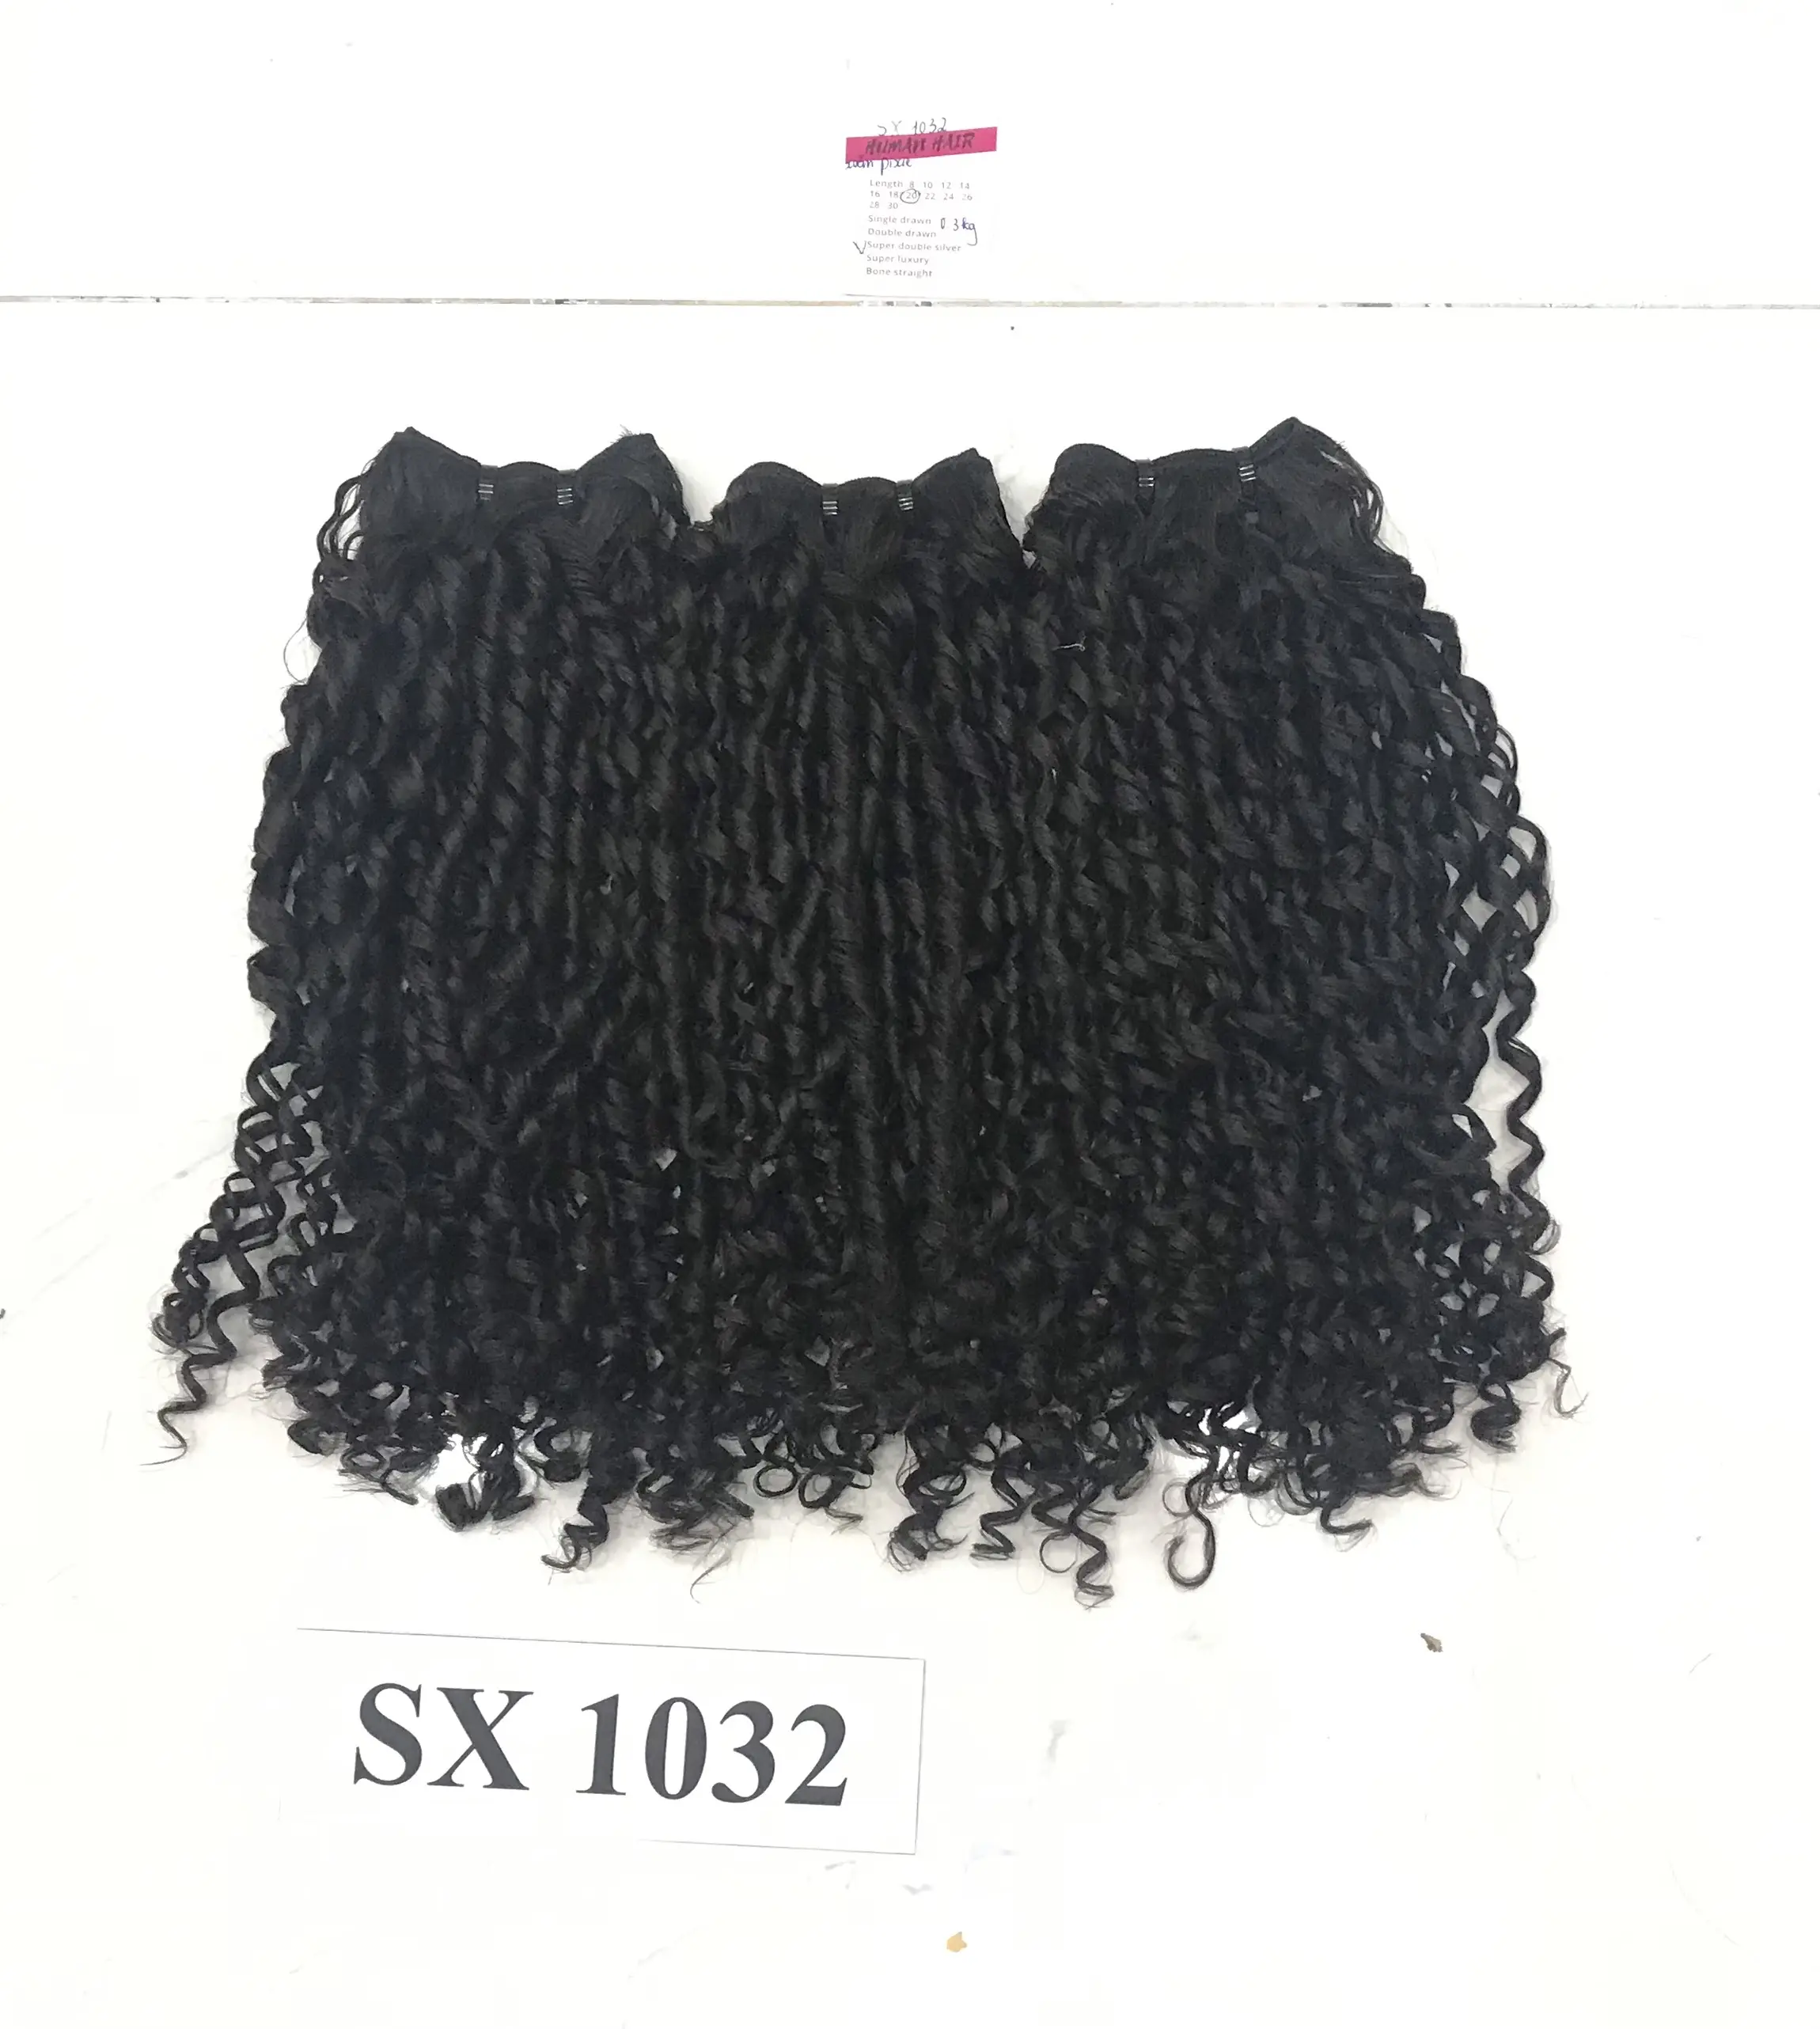 New Arrivals Cuticle aligned black curly human hair Hairstyles pixie curly brazilian hair